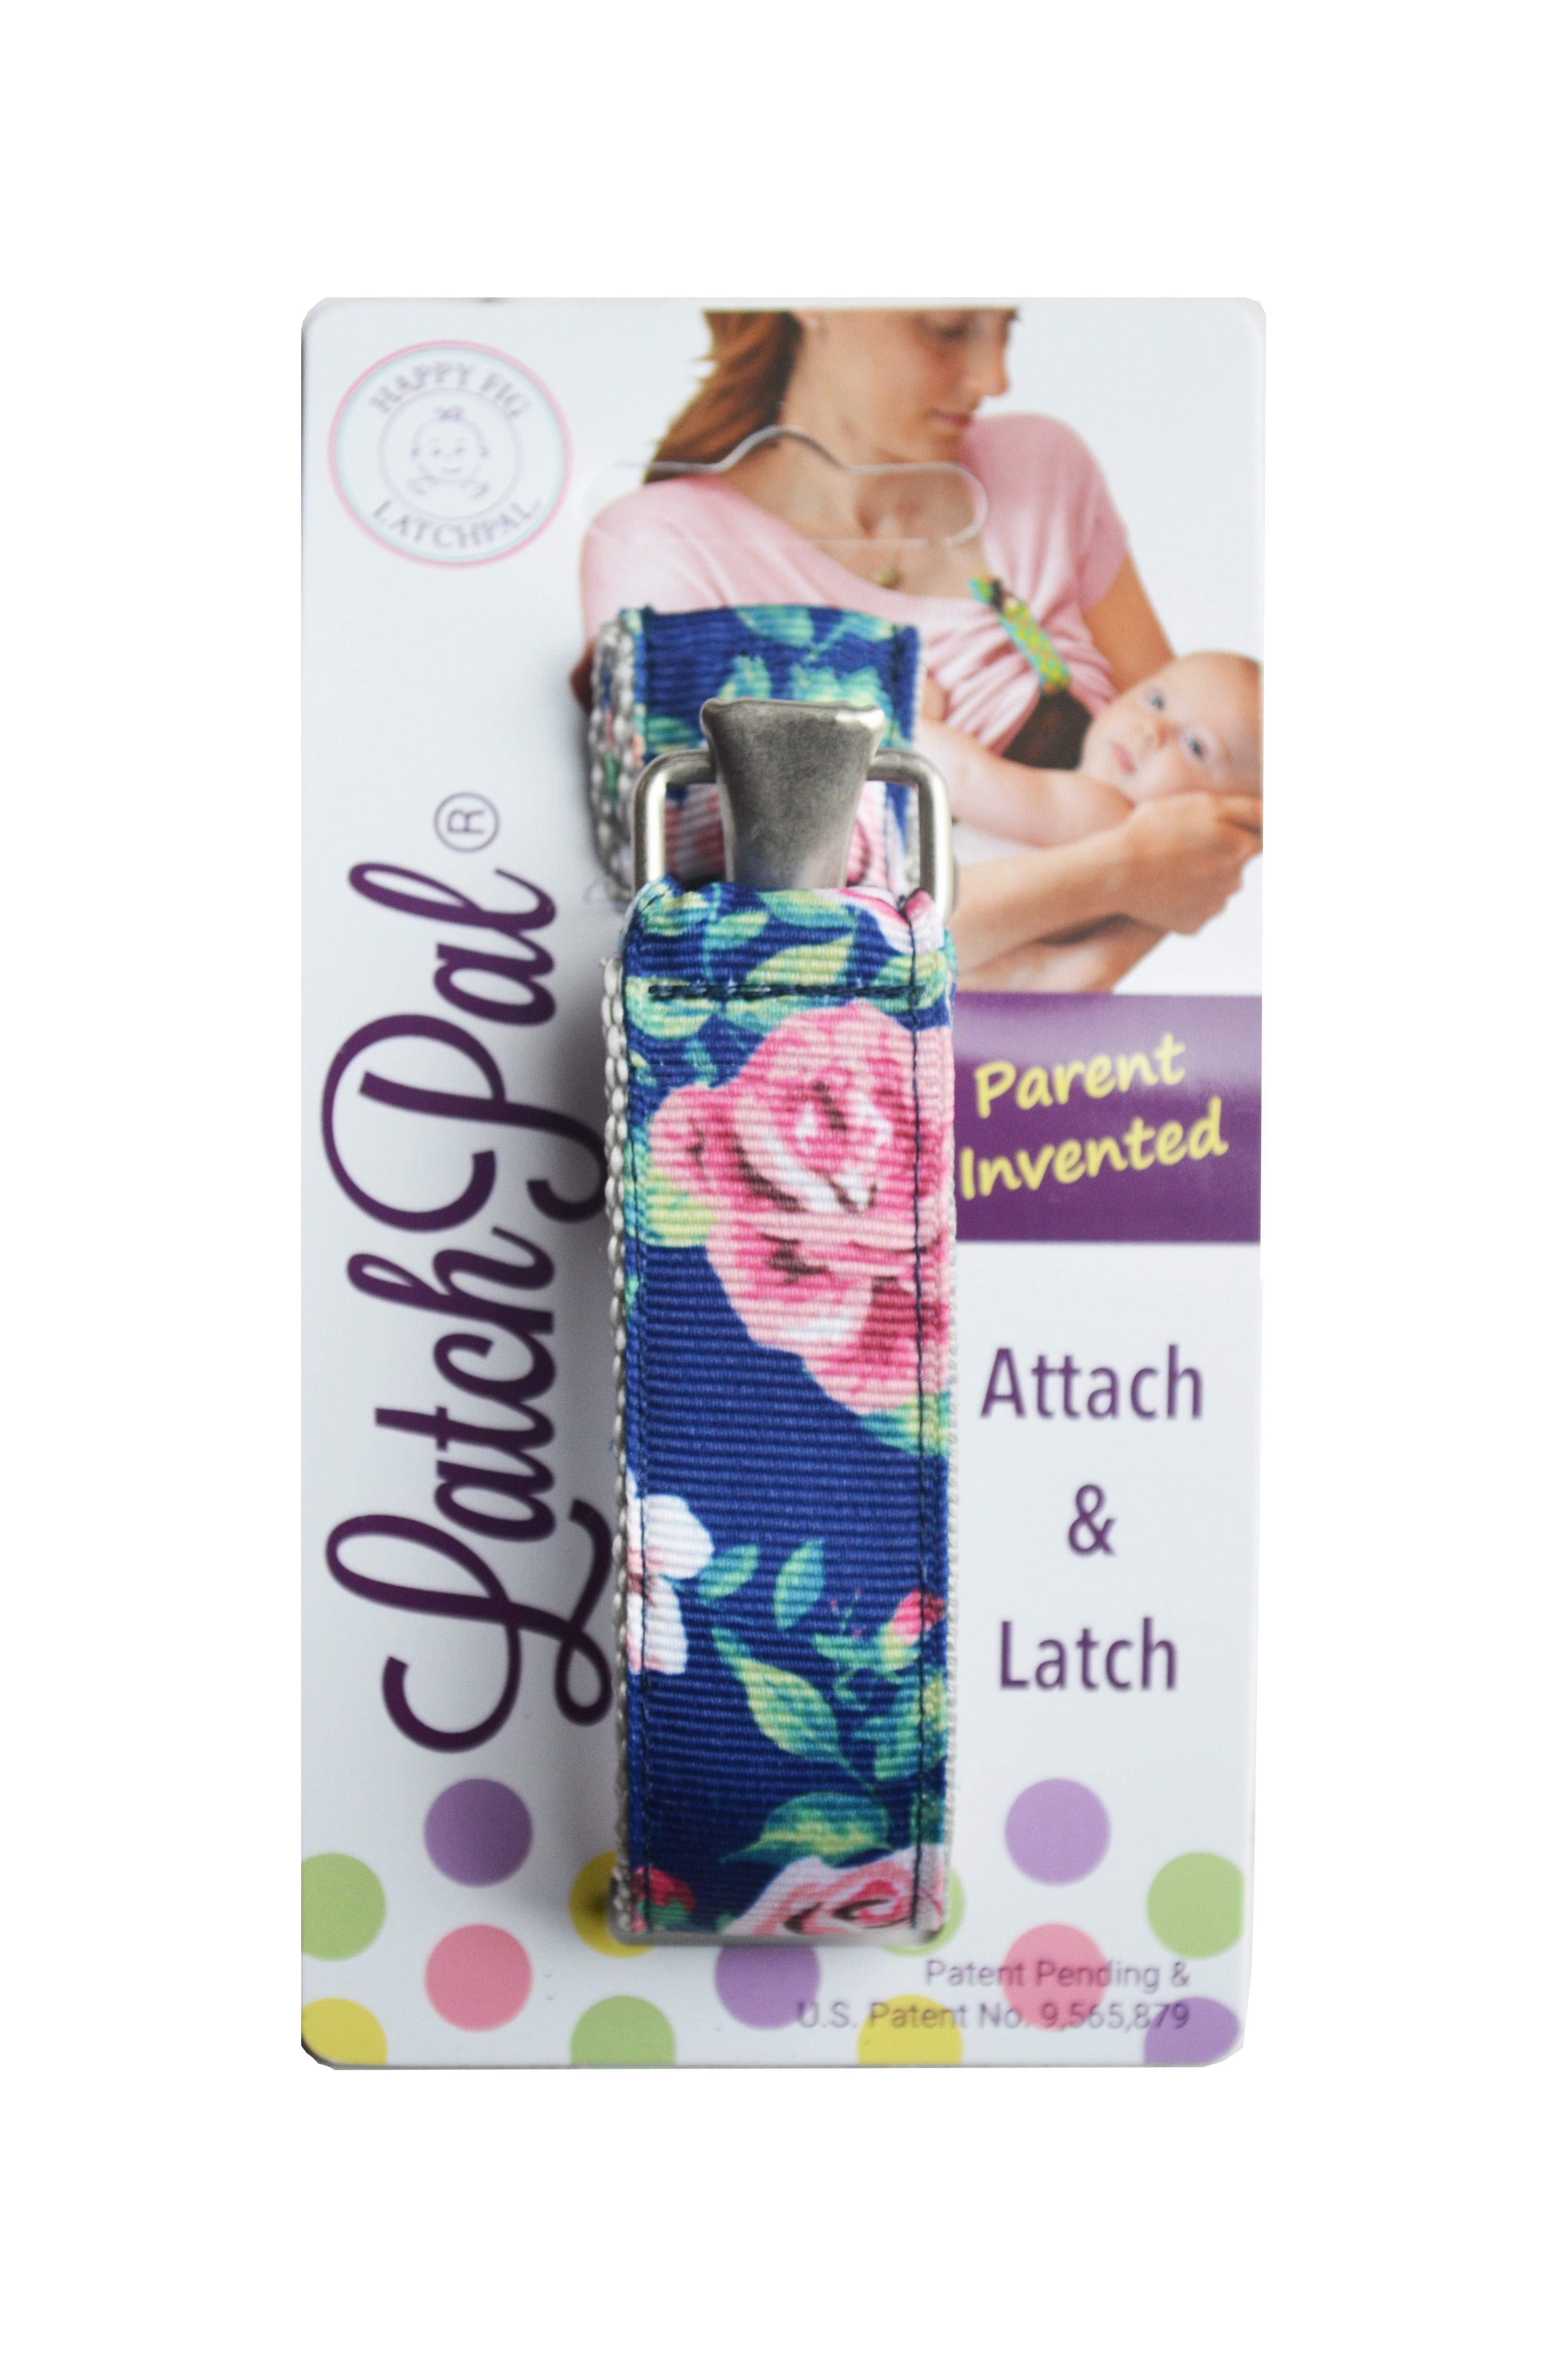 Shirt Holder Non-Slip Alternative to Nursing Tops LatchPal Hands-Free Nursing Clip for Breastfeeding- Simple Helpful with Nursing Cover and Breast Pump Quick Fastening Spring Rose Floral 